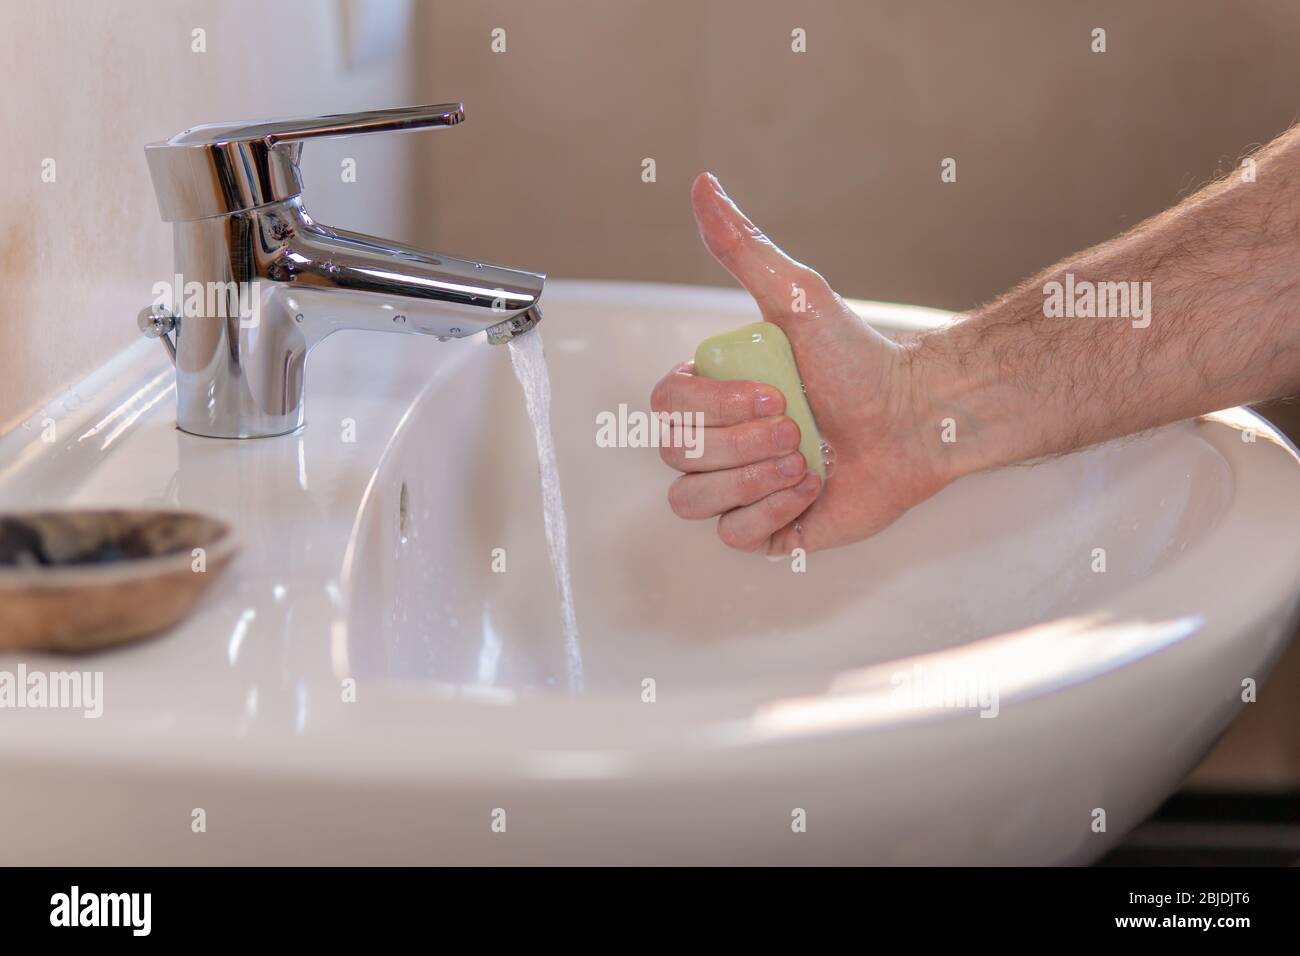 Hand of young caucasian man holding a bar of soap and showing thumb up gesture. Water tap is running. Personal hygiene, economical usage of water Stock Photo